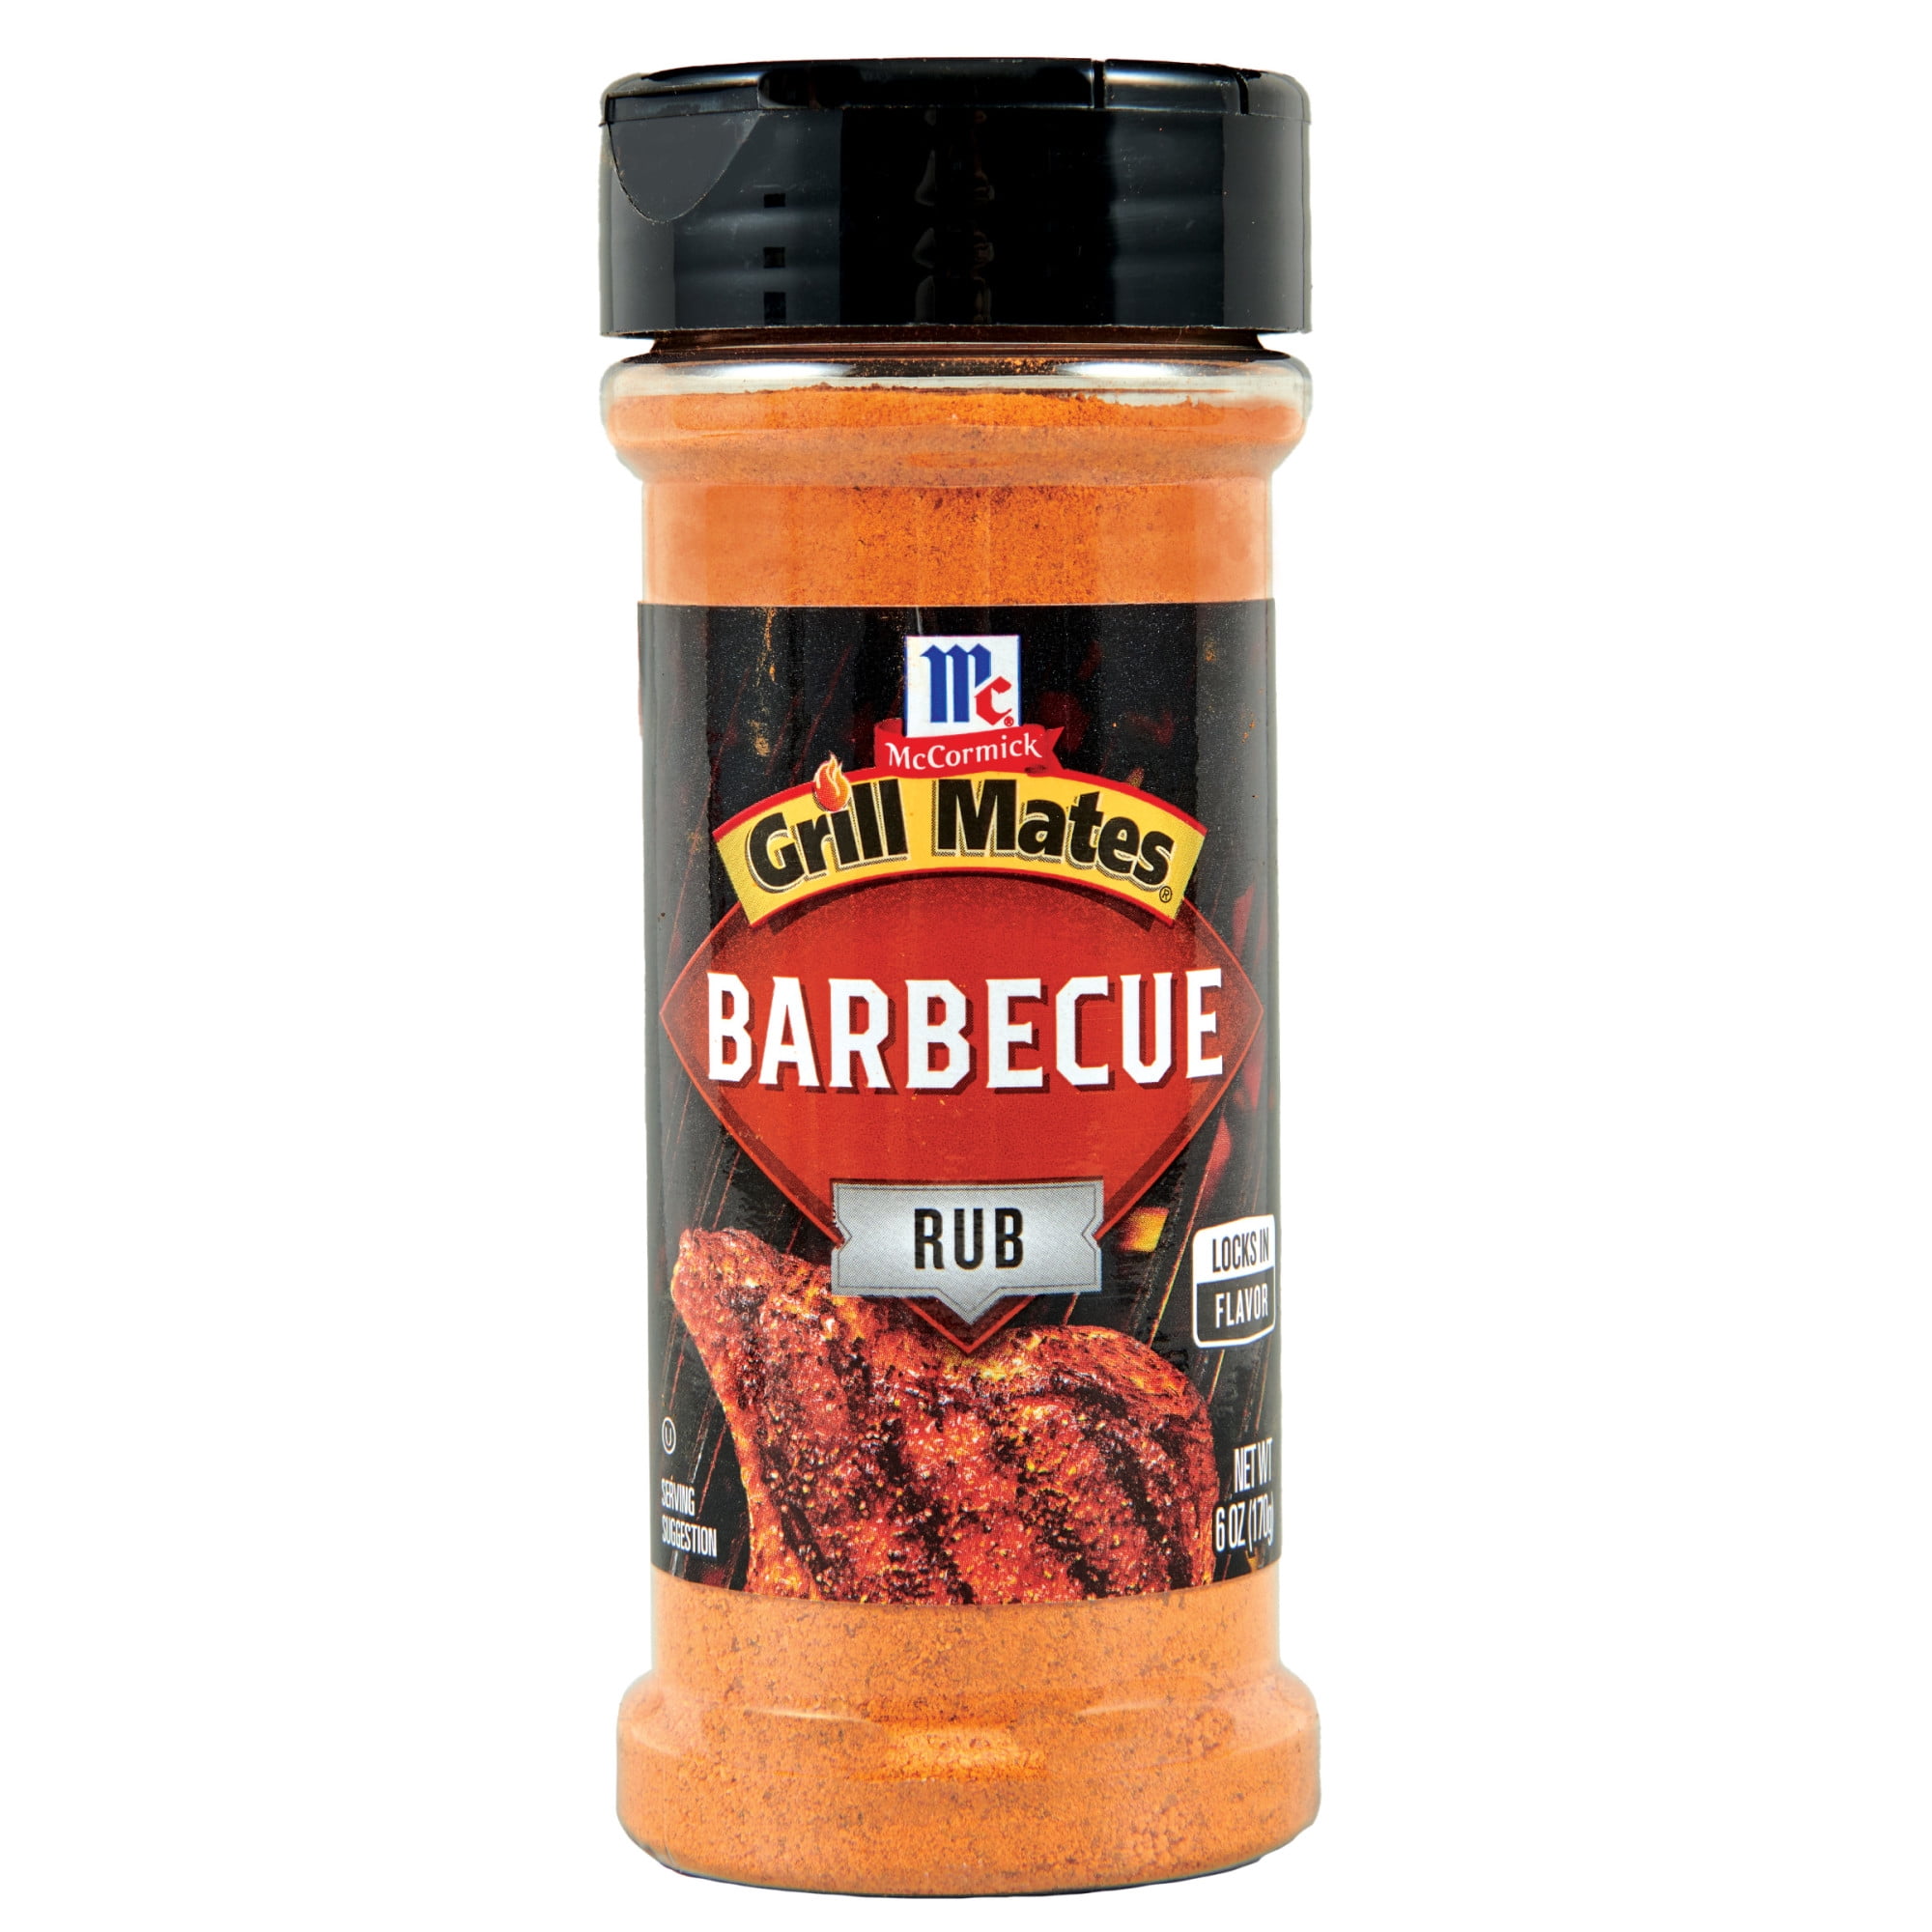 McCormick Grill Mates Barbecue Rub, 6 oz Mixed Spices & Seasonings